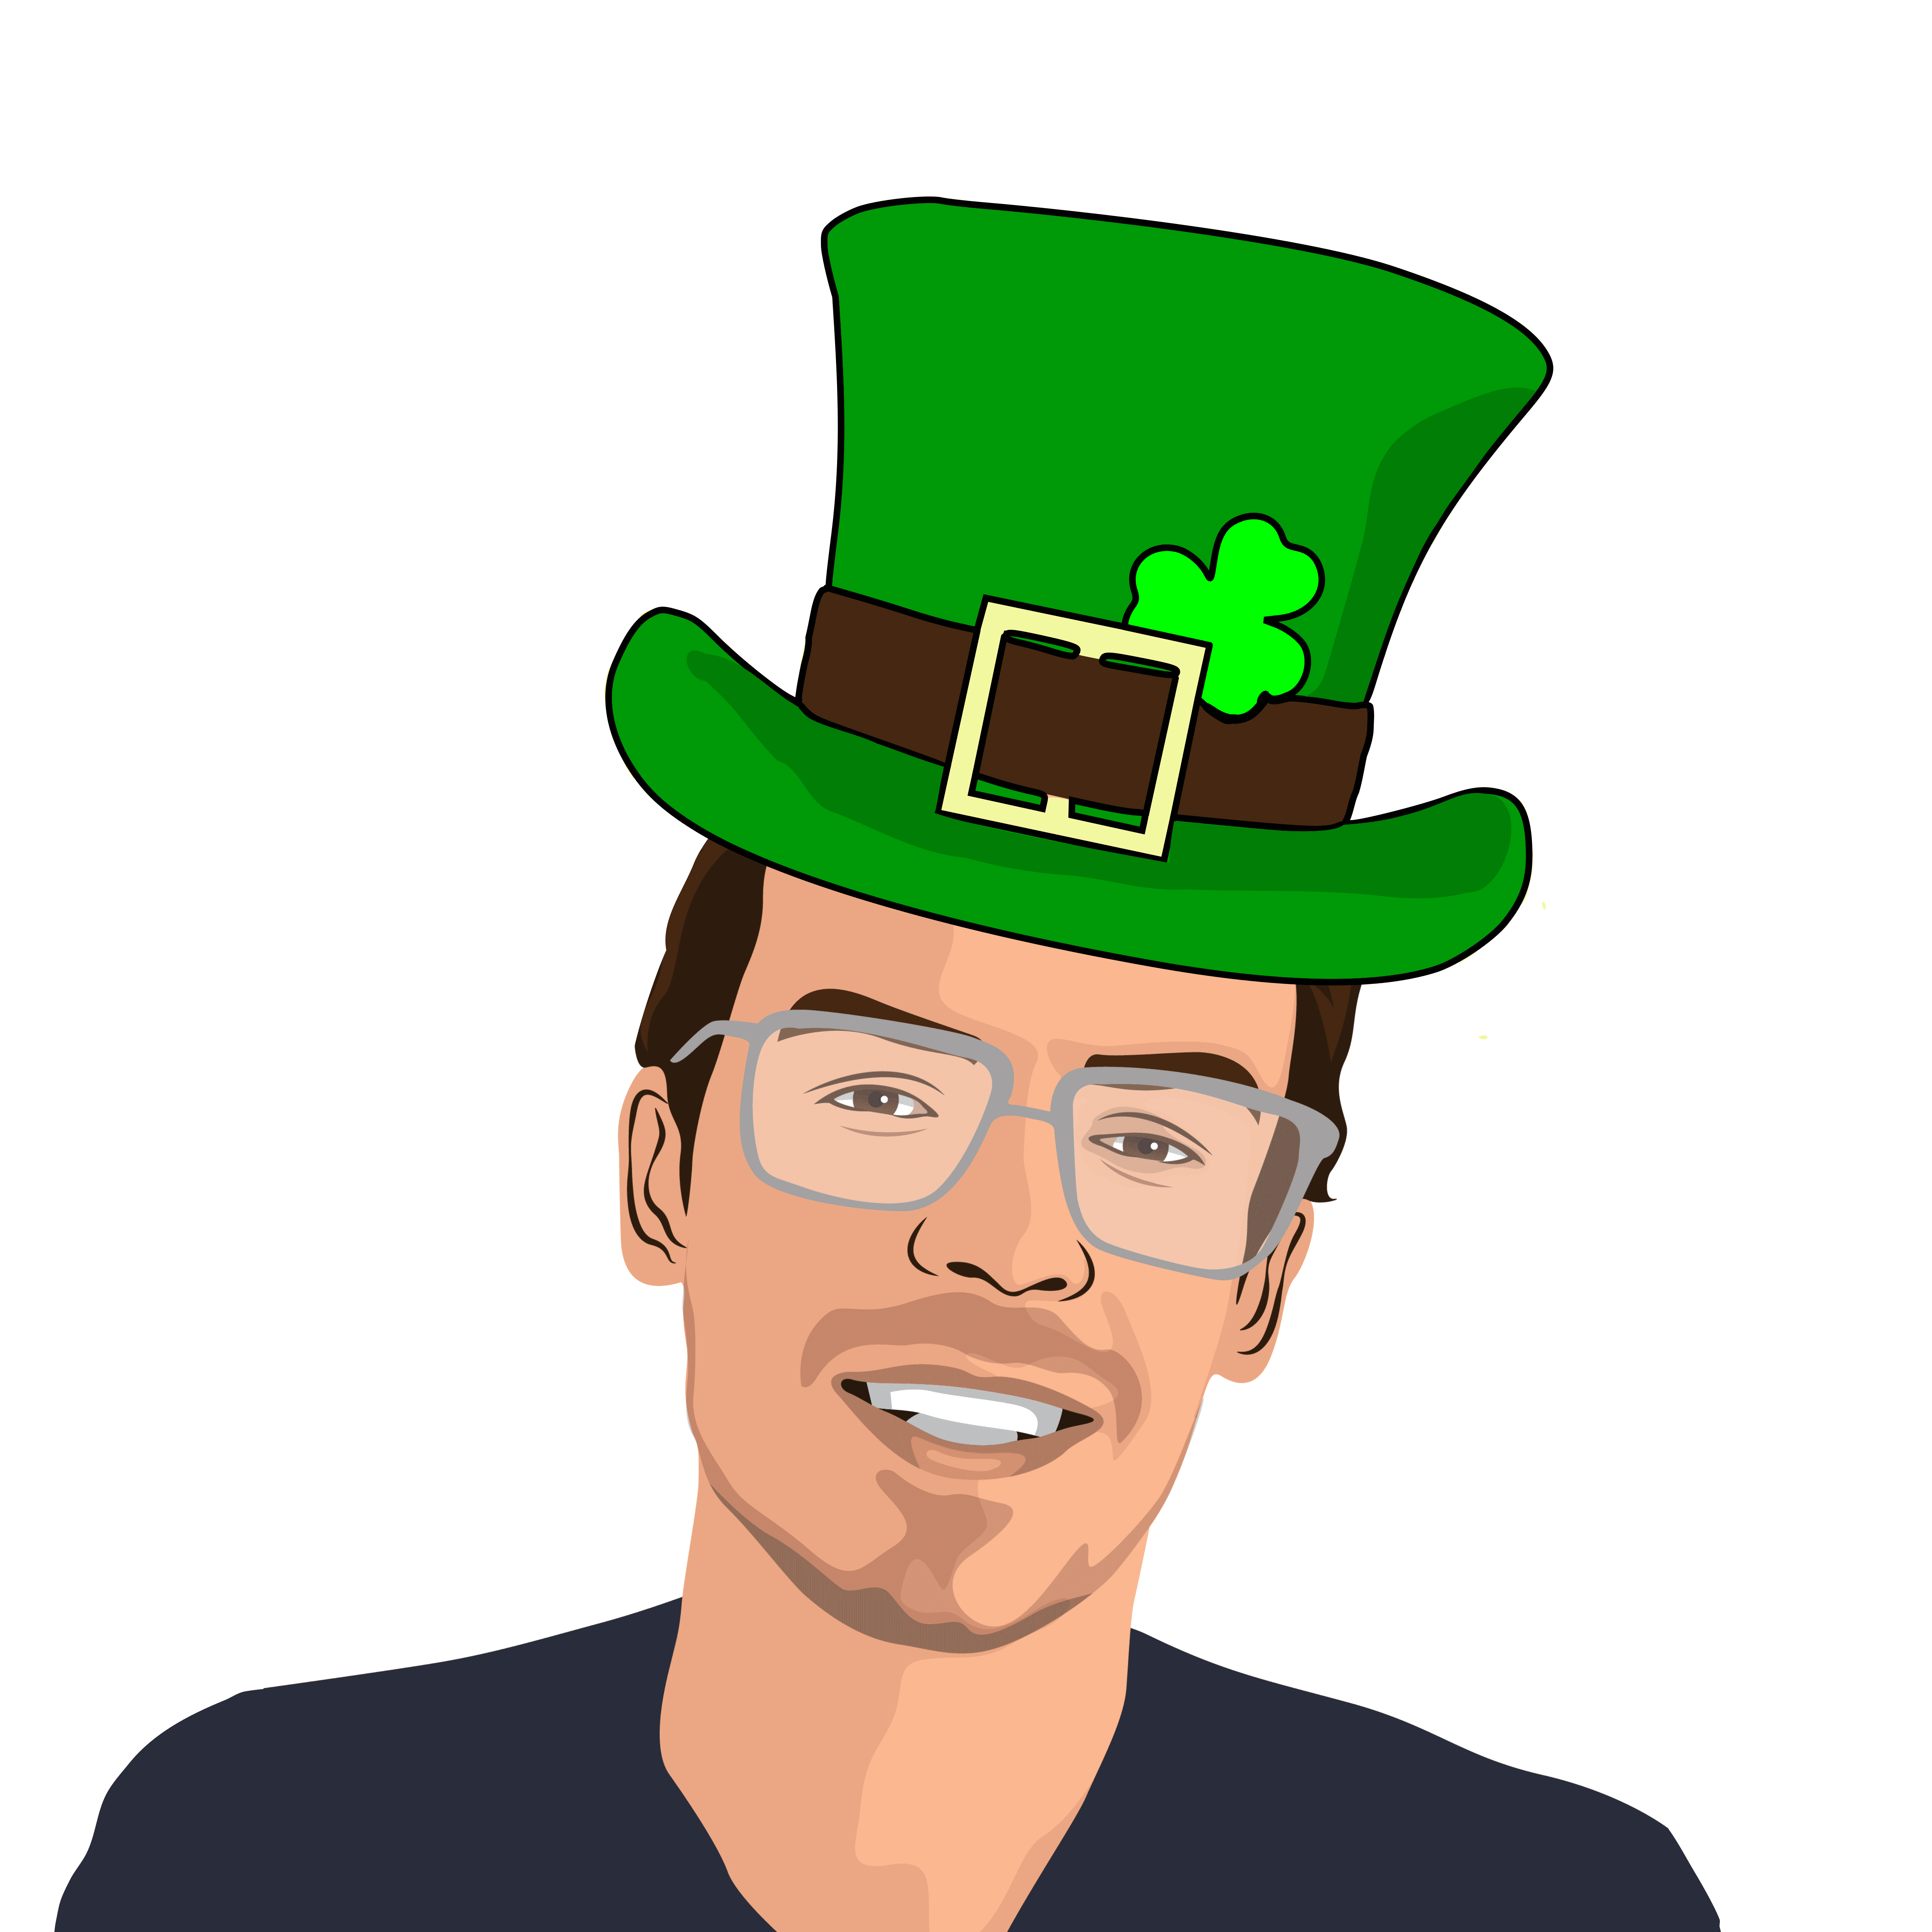 Chris is thinking about St. Patrick's Day!